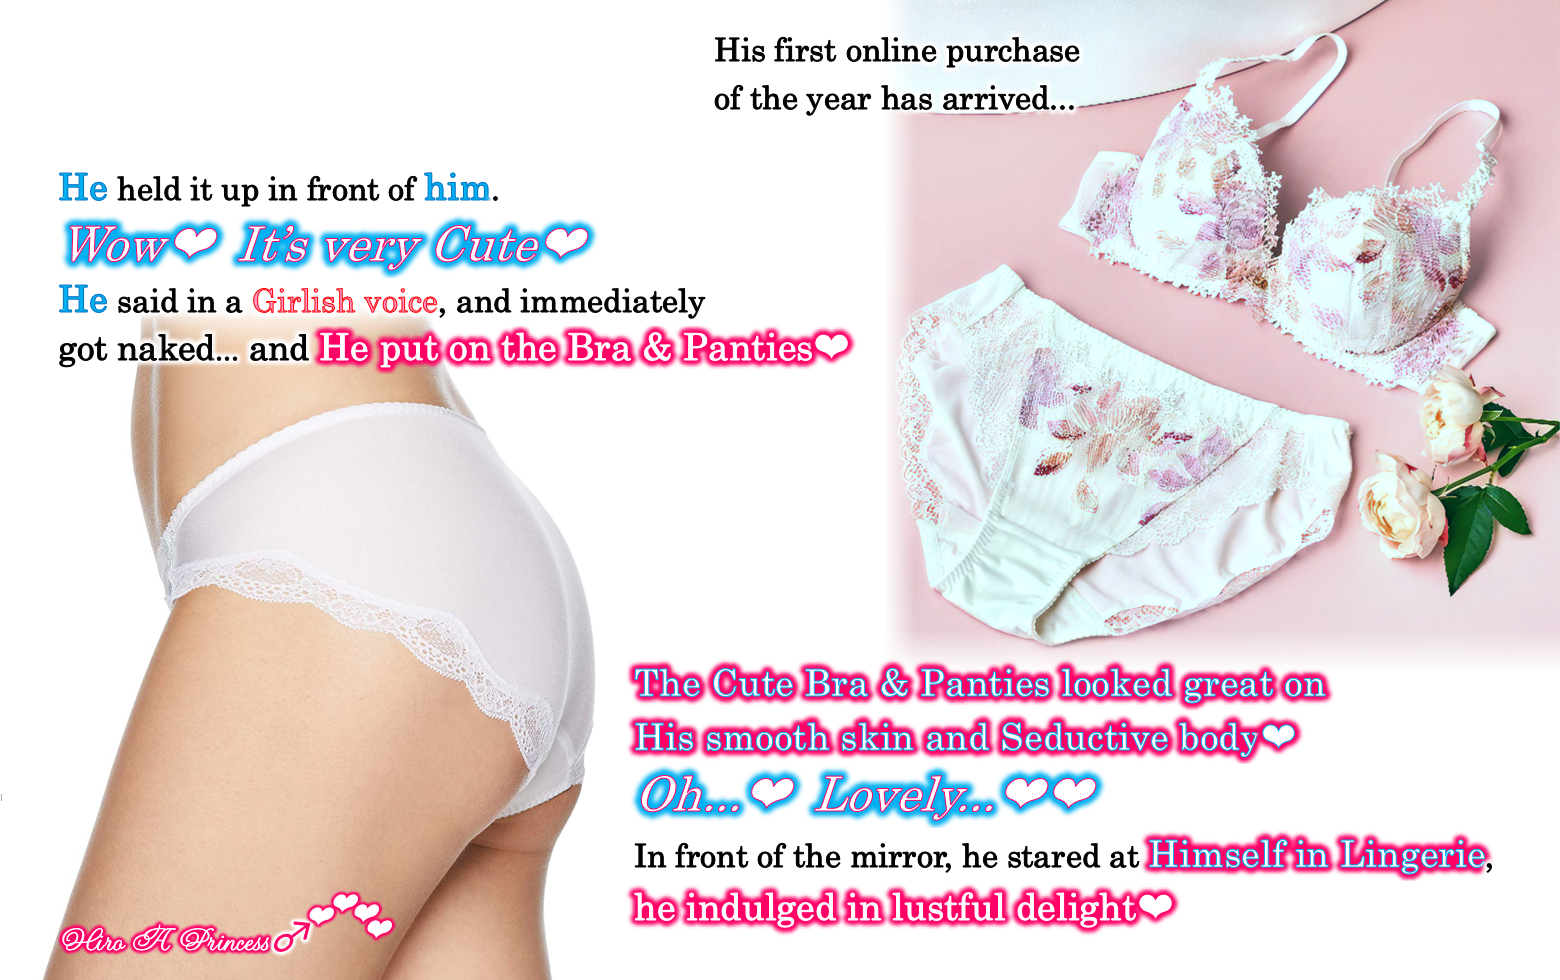 His first online purchase of the year is Bra  Panties for himself E